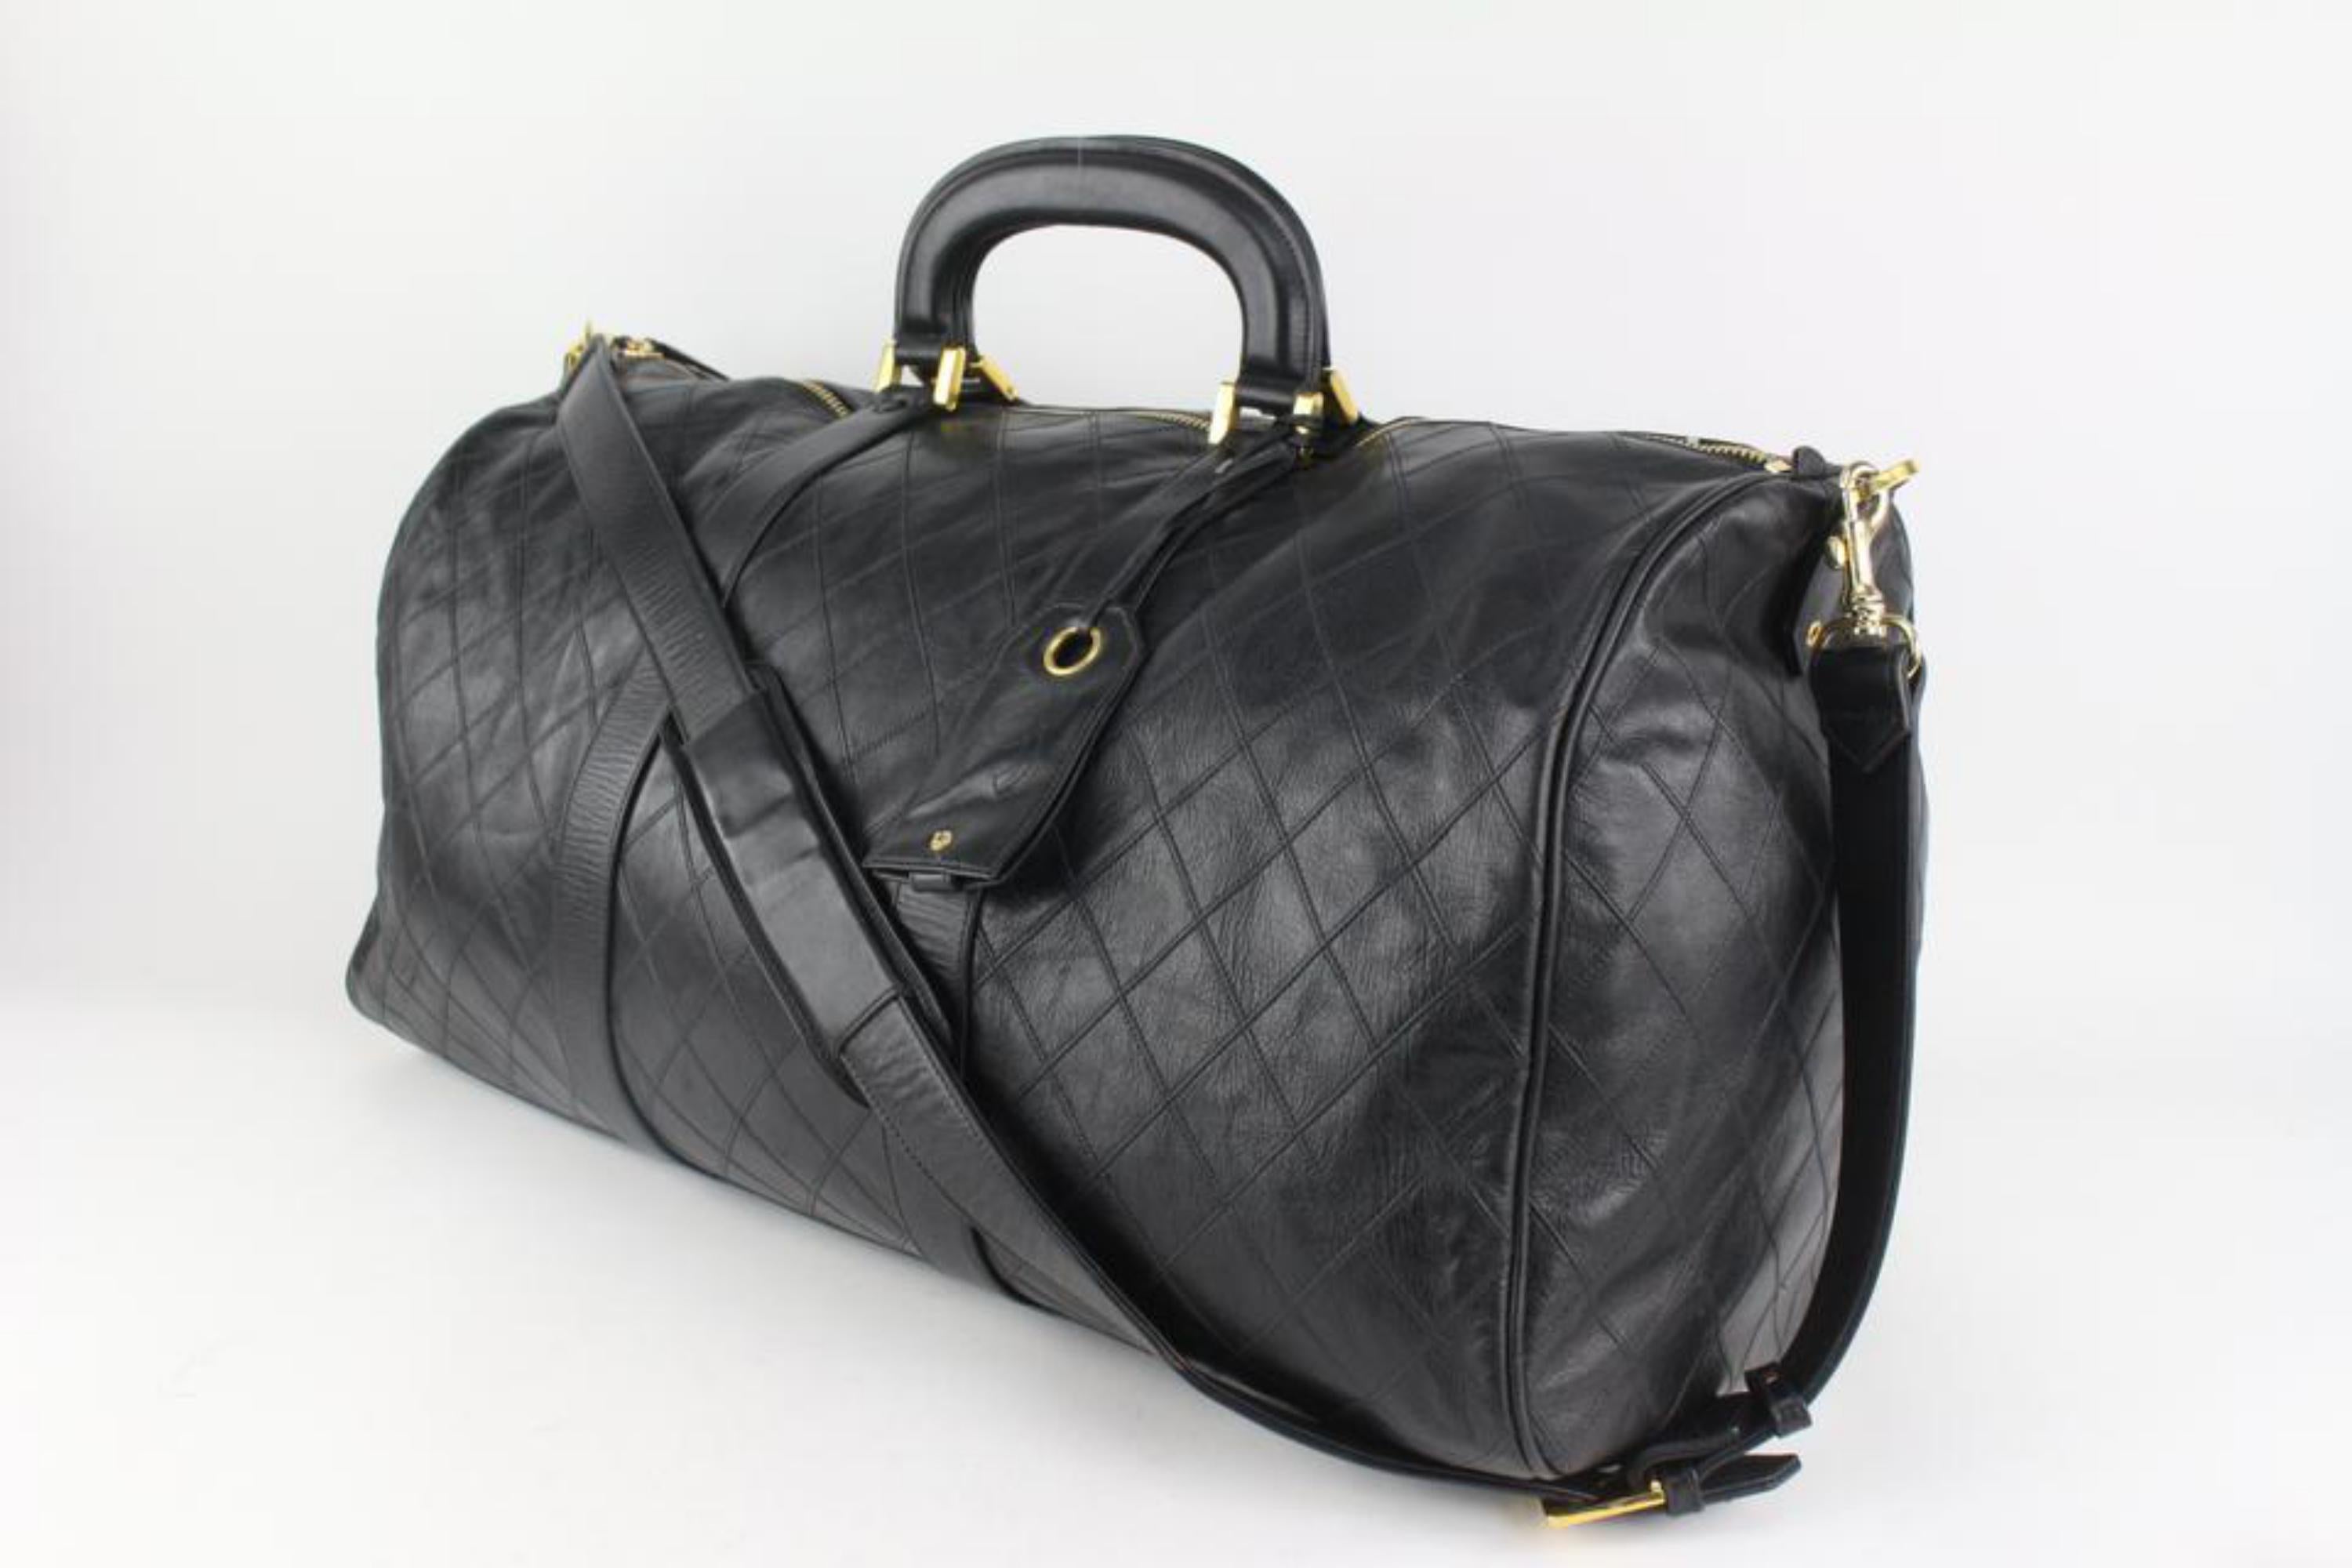 Chanel Black Quilted Lambskin Boston Duffle with Strap 1116c43
Date Code/Serial Number: 0842443
Made In: Italy
Measurements: Length:  23